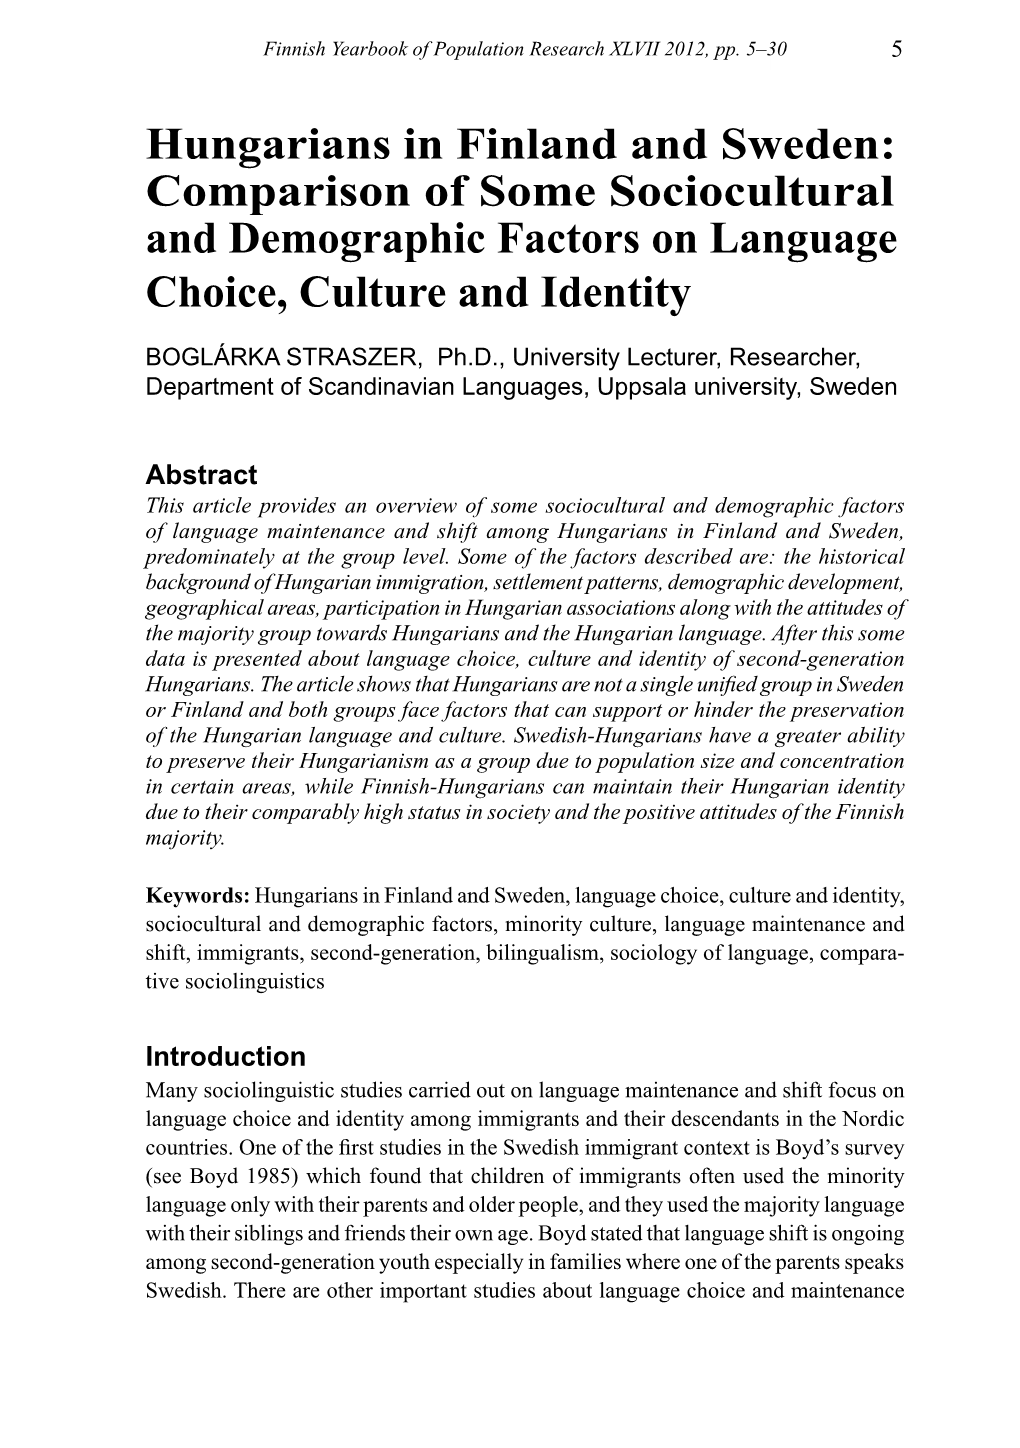 Hungarians in Finland and Sweden: Comparison of Some Sociocultural and Demographic Factors on Language Choice, Culture and Identity